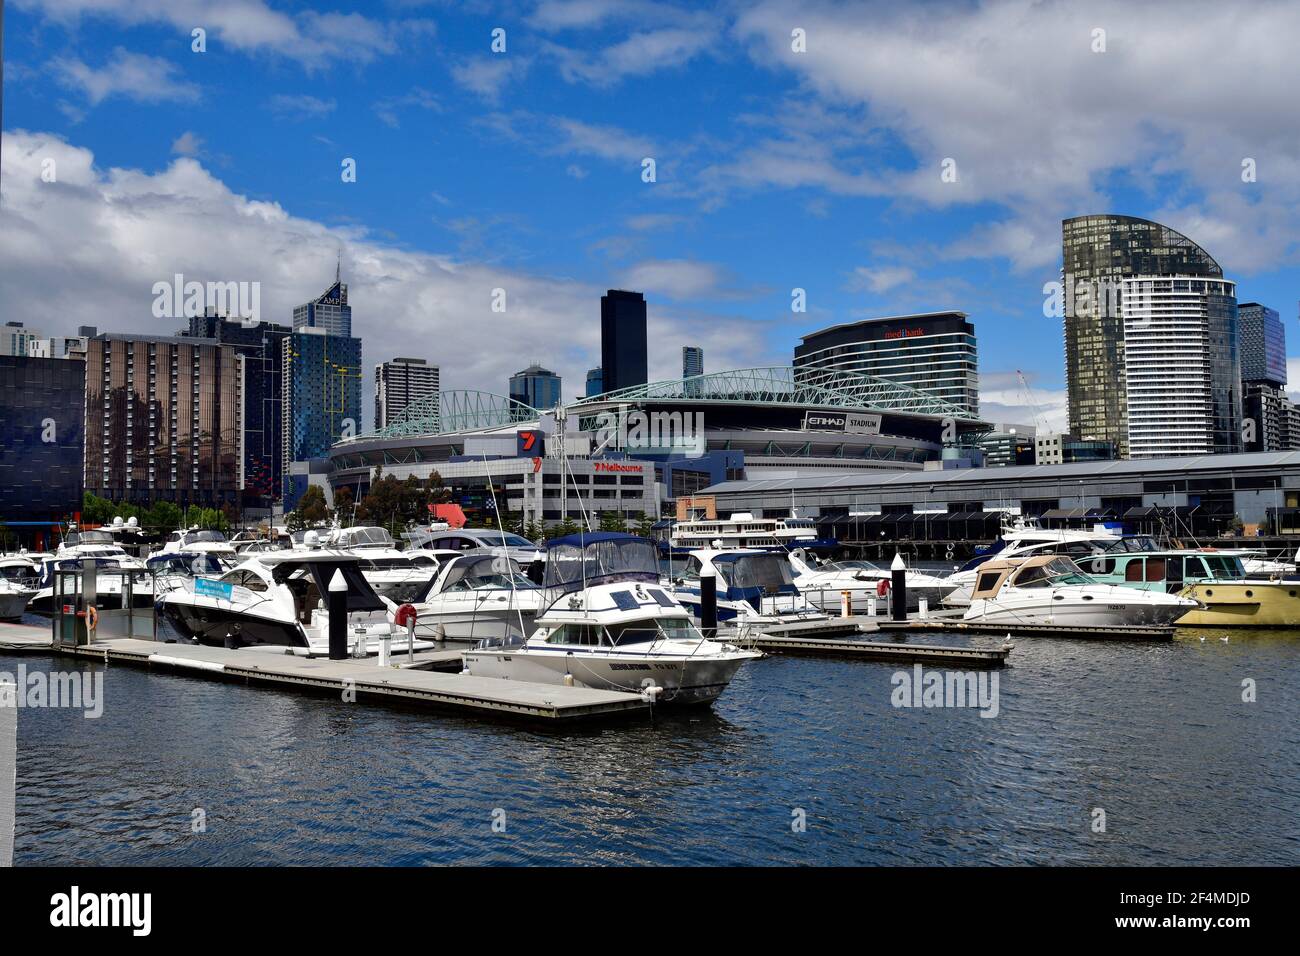 Melbourne, VIC, Australia - November 03, 2017: Boats in harbor, buildings and Stadium in Dockland district Stock Photo